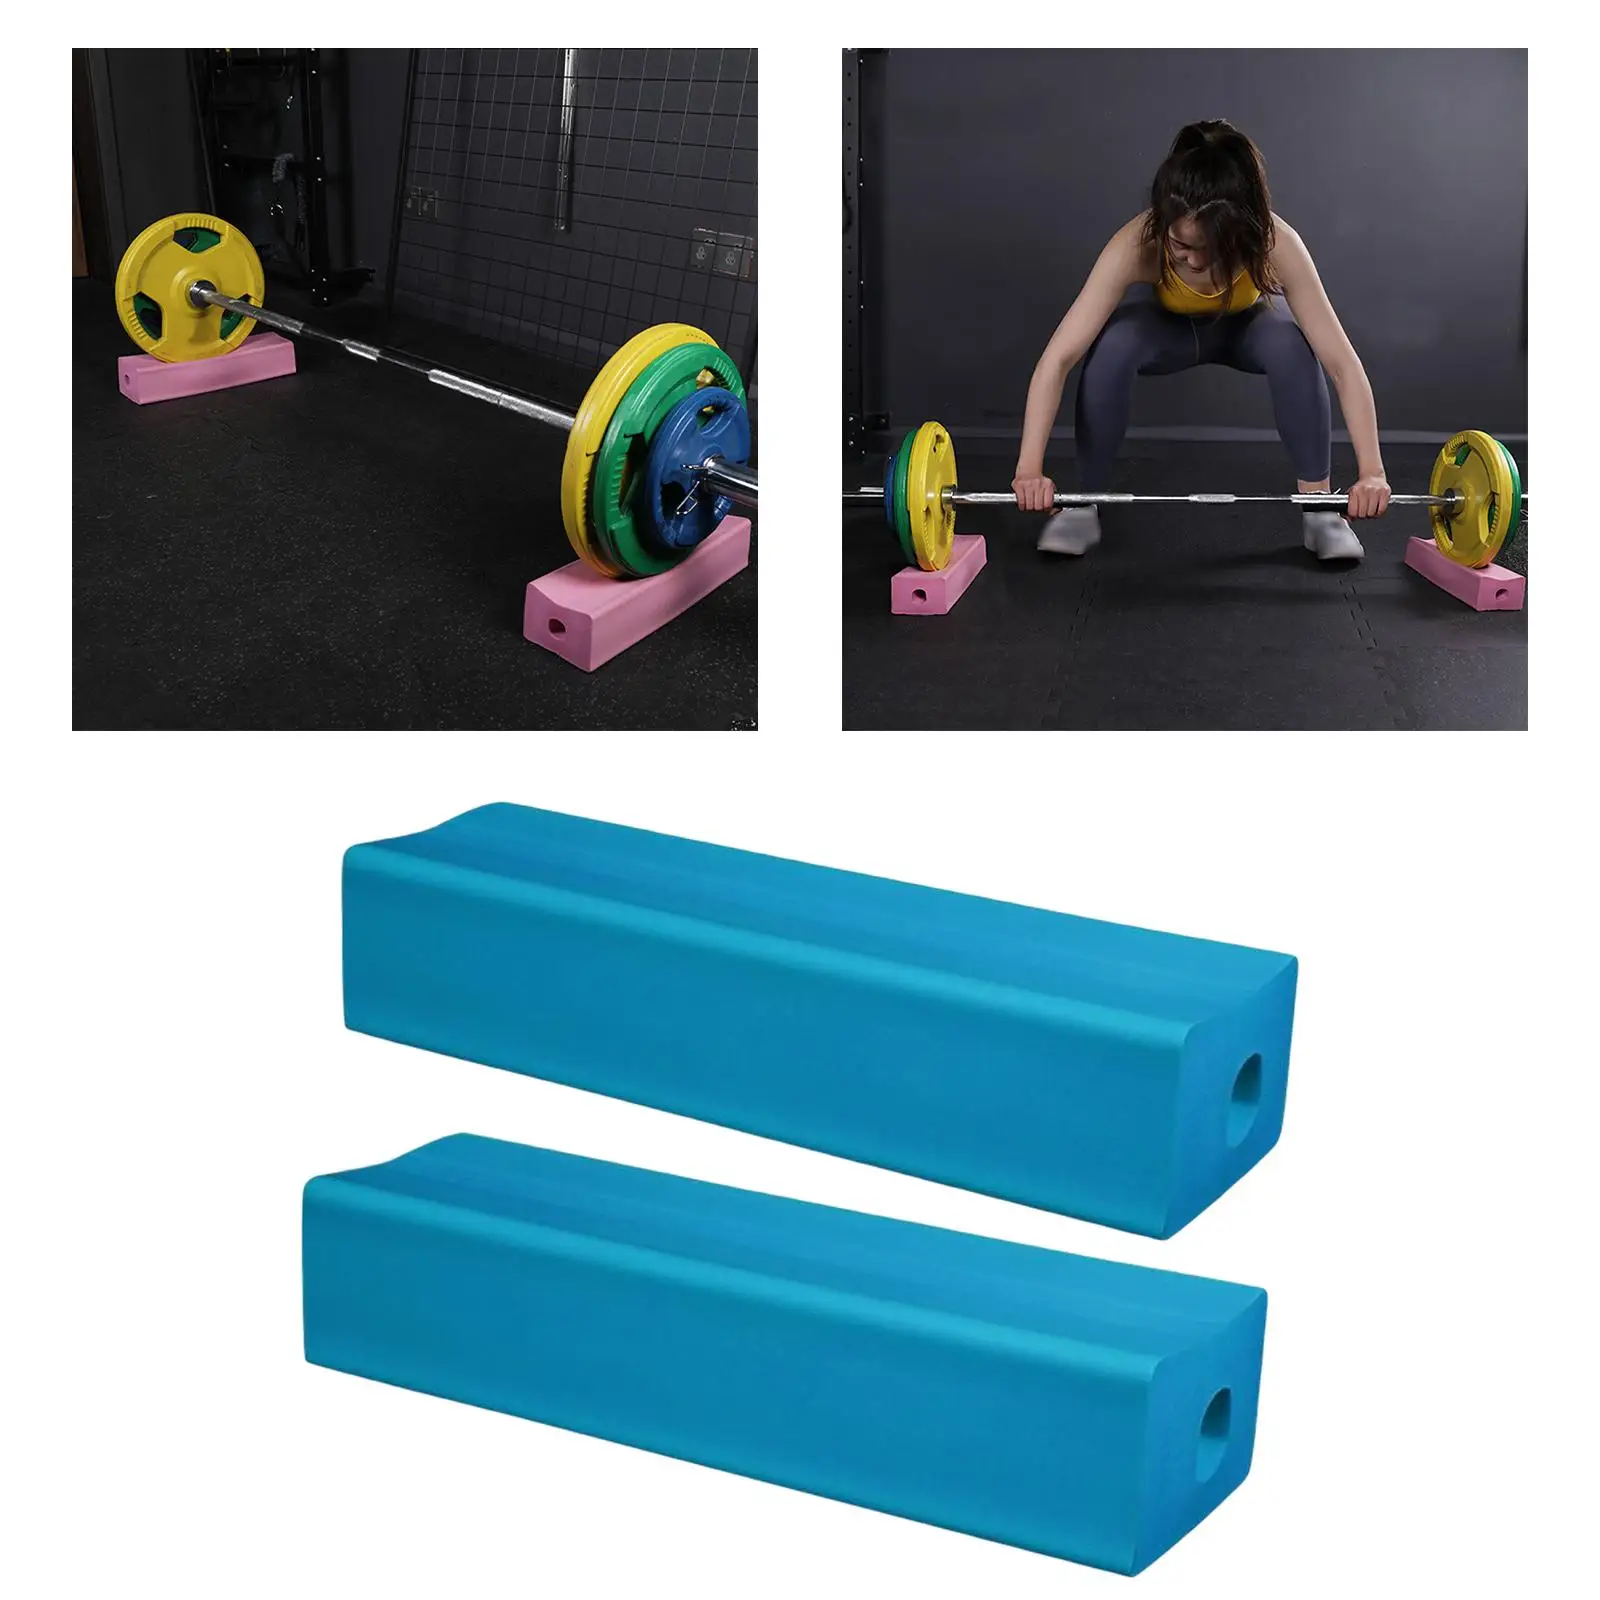 Fitness Barbell Pad Durable Good Elasticity Padded Cushion for Weightlifting Training Exercises Easier Barbell Placement Office